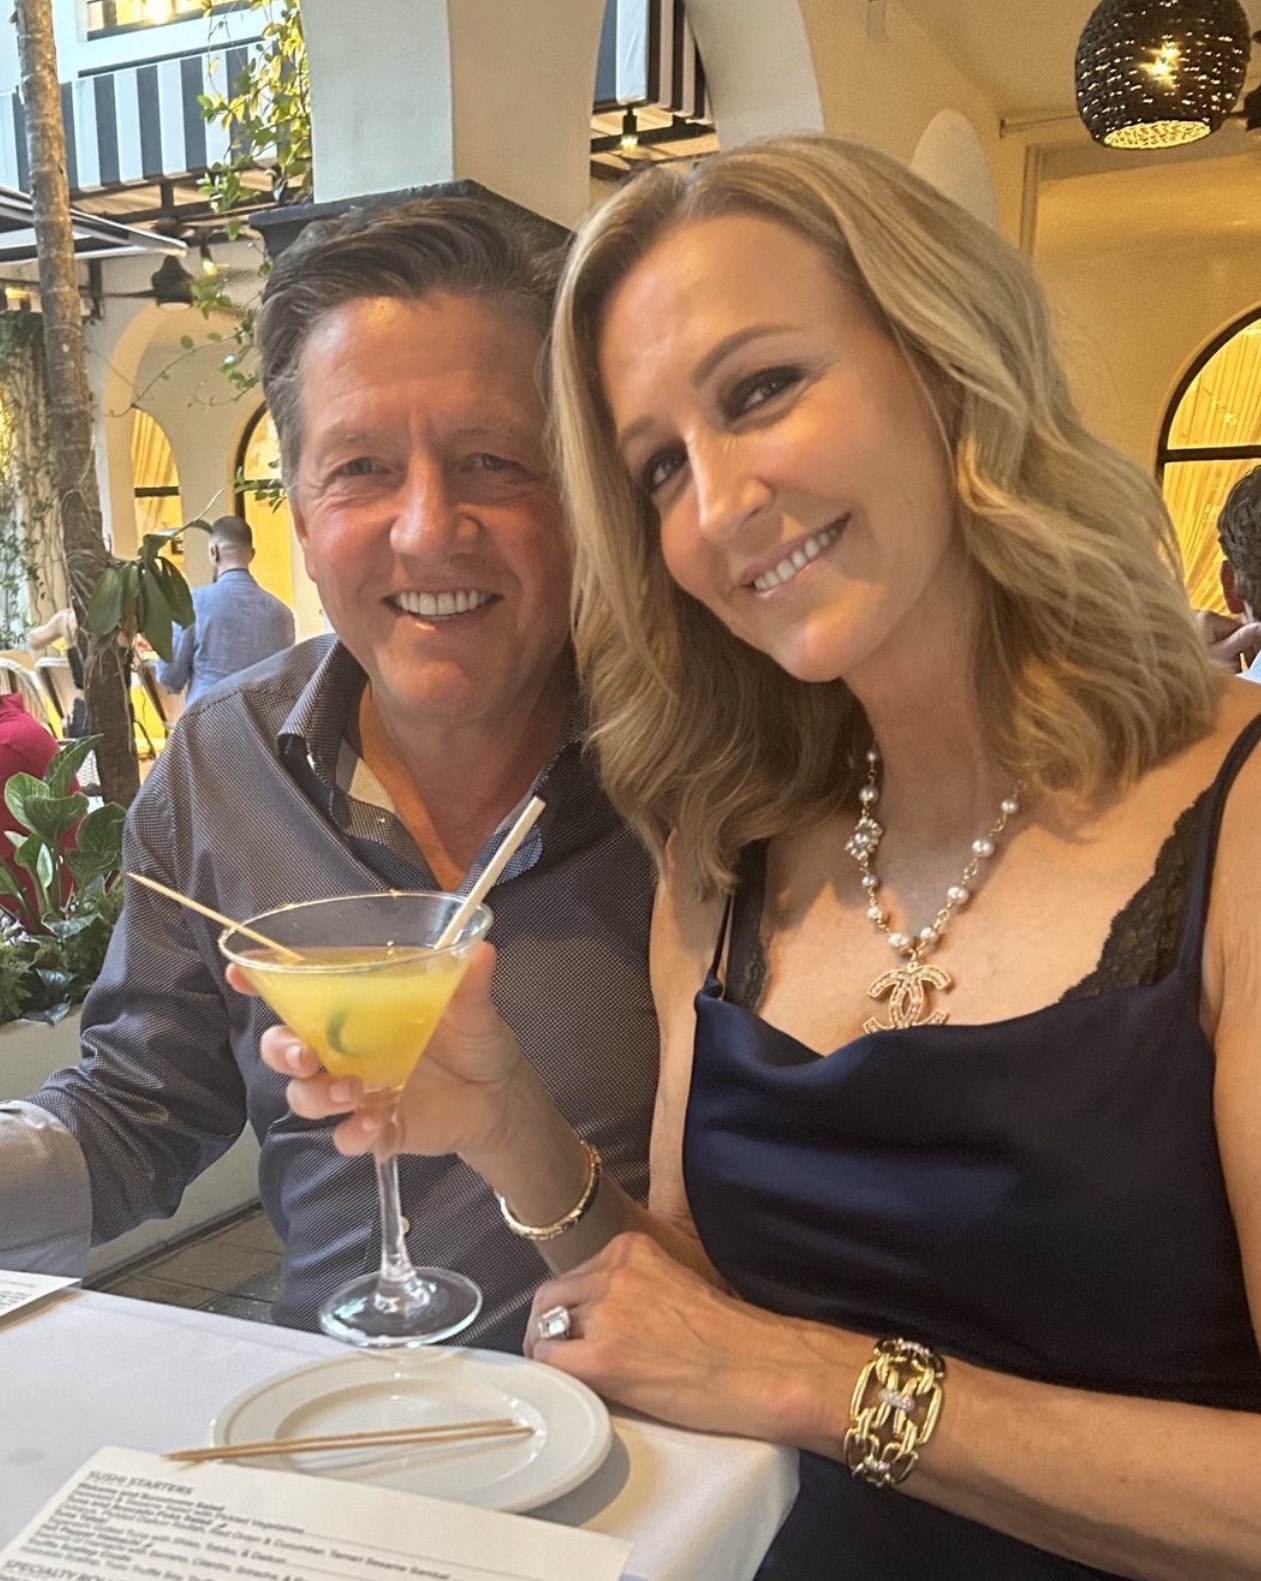 Lara Spencer Best Outfits Photos: 'GMA' Host Fashion | Closer Weekly